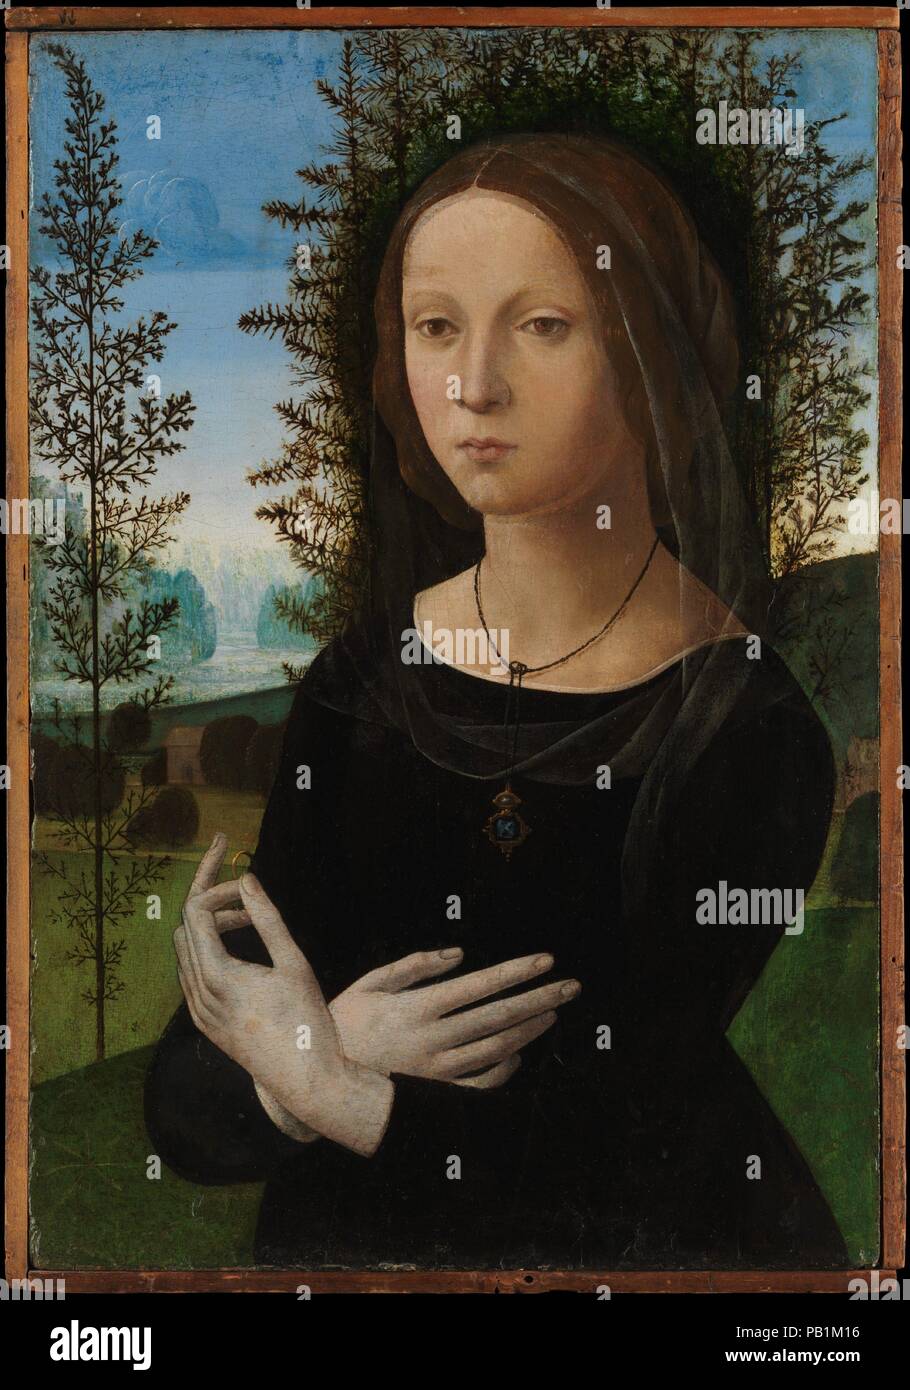 Portrait of a Young Woman. Artist: Lorenzo di Credi (Lorenzo d'Andrea d'Oderigo) (Italian, Florence 1456/59-1536 Florence). Dimensions: 23 1/8 x 15 3/4 in. (58.7 x 40 cm). Date: ca. 1490-1500.  This damaged but evocative portrait has been identified as the widow of Credi's brother, who was a goldsmith. This would explain why she is dressed in black and holds a ring. The juniper bush (<i>ginepro</i>) behind her could refer to her name, Ginevra di Giovanni di Niccolò. The picture was inspired by Leonardo's portrait of Ginevra de' Benci in the National Gallery of Art, Washington. Museum: Metropol Stock Photo